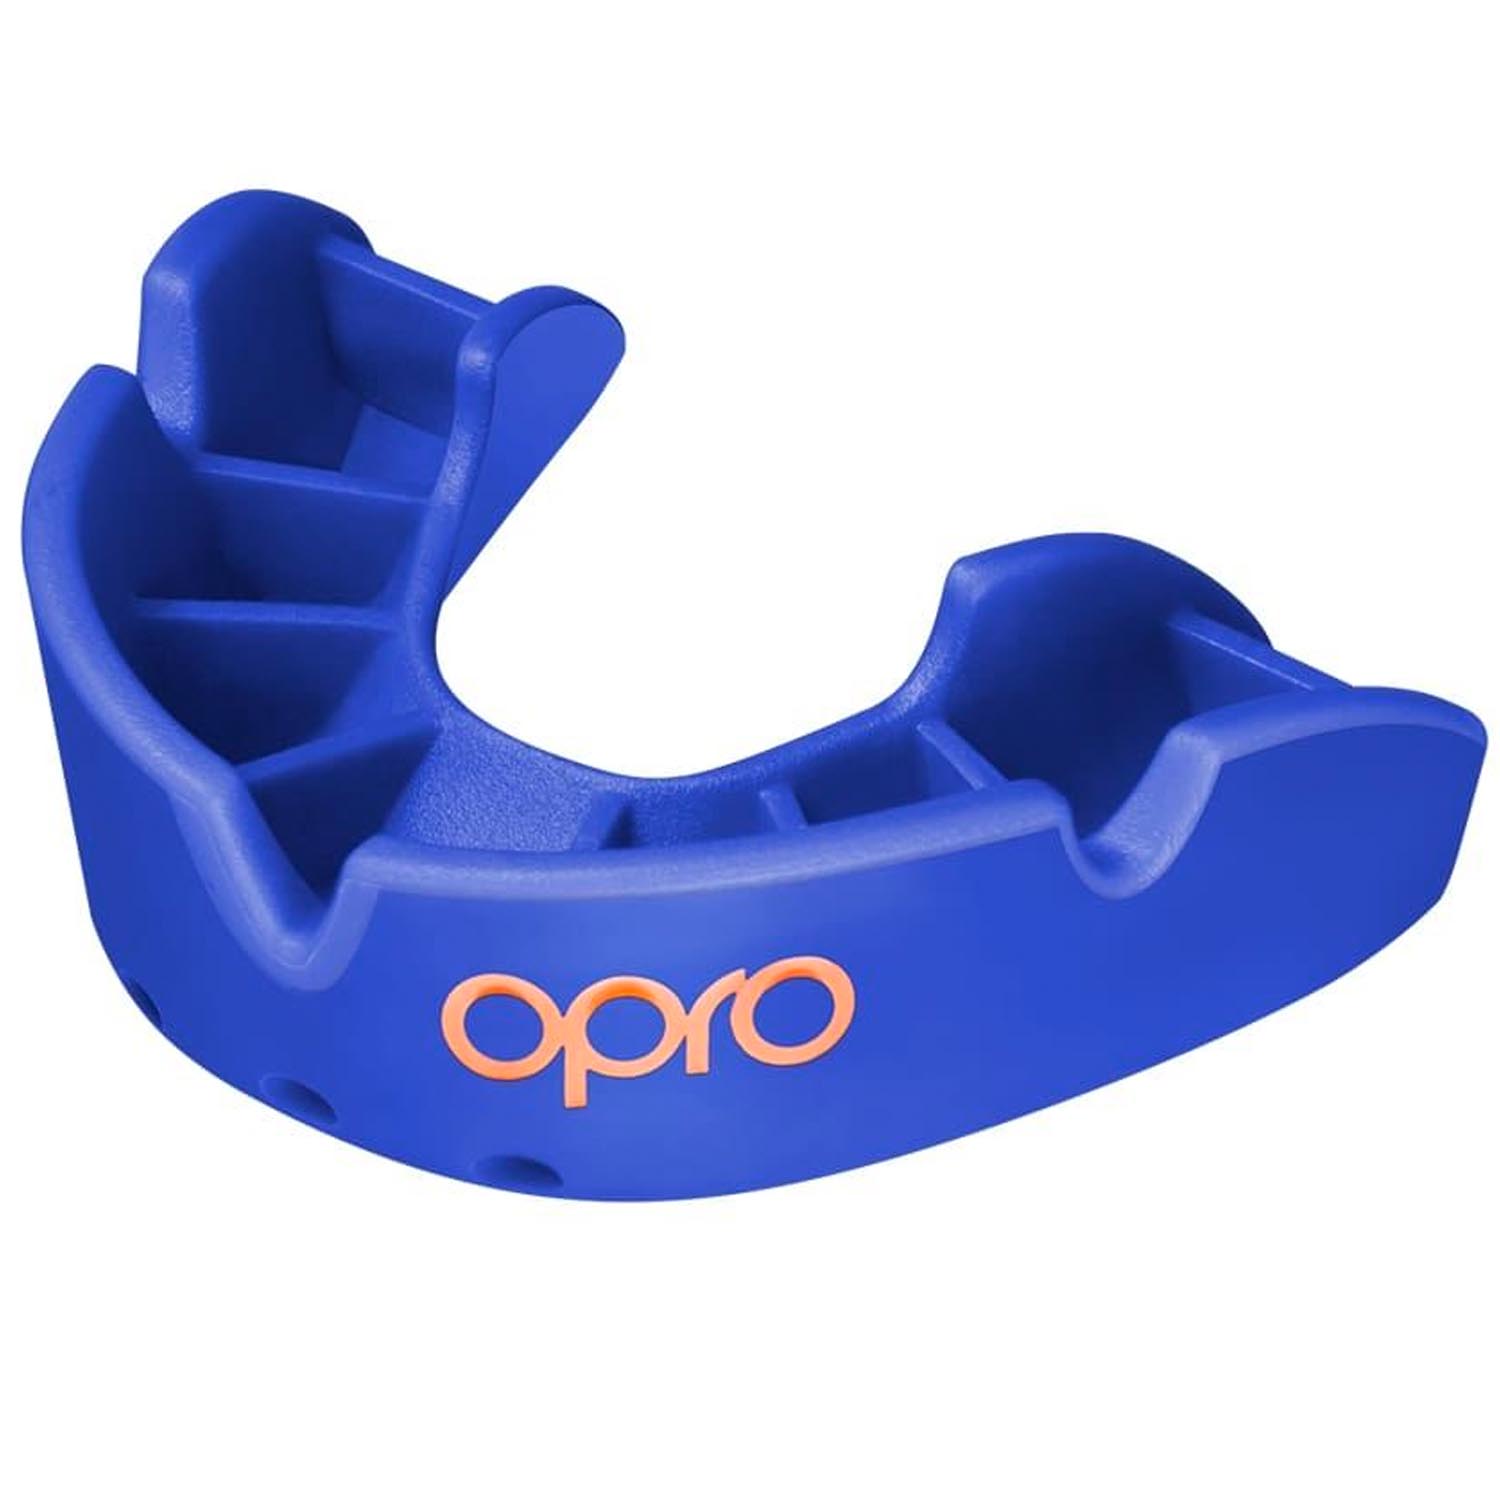 OPRO Mouth Guard, Bronze 2022, blue